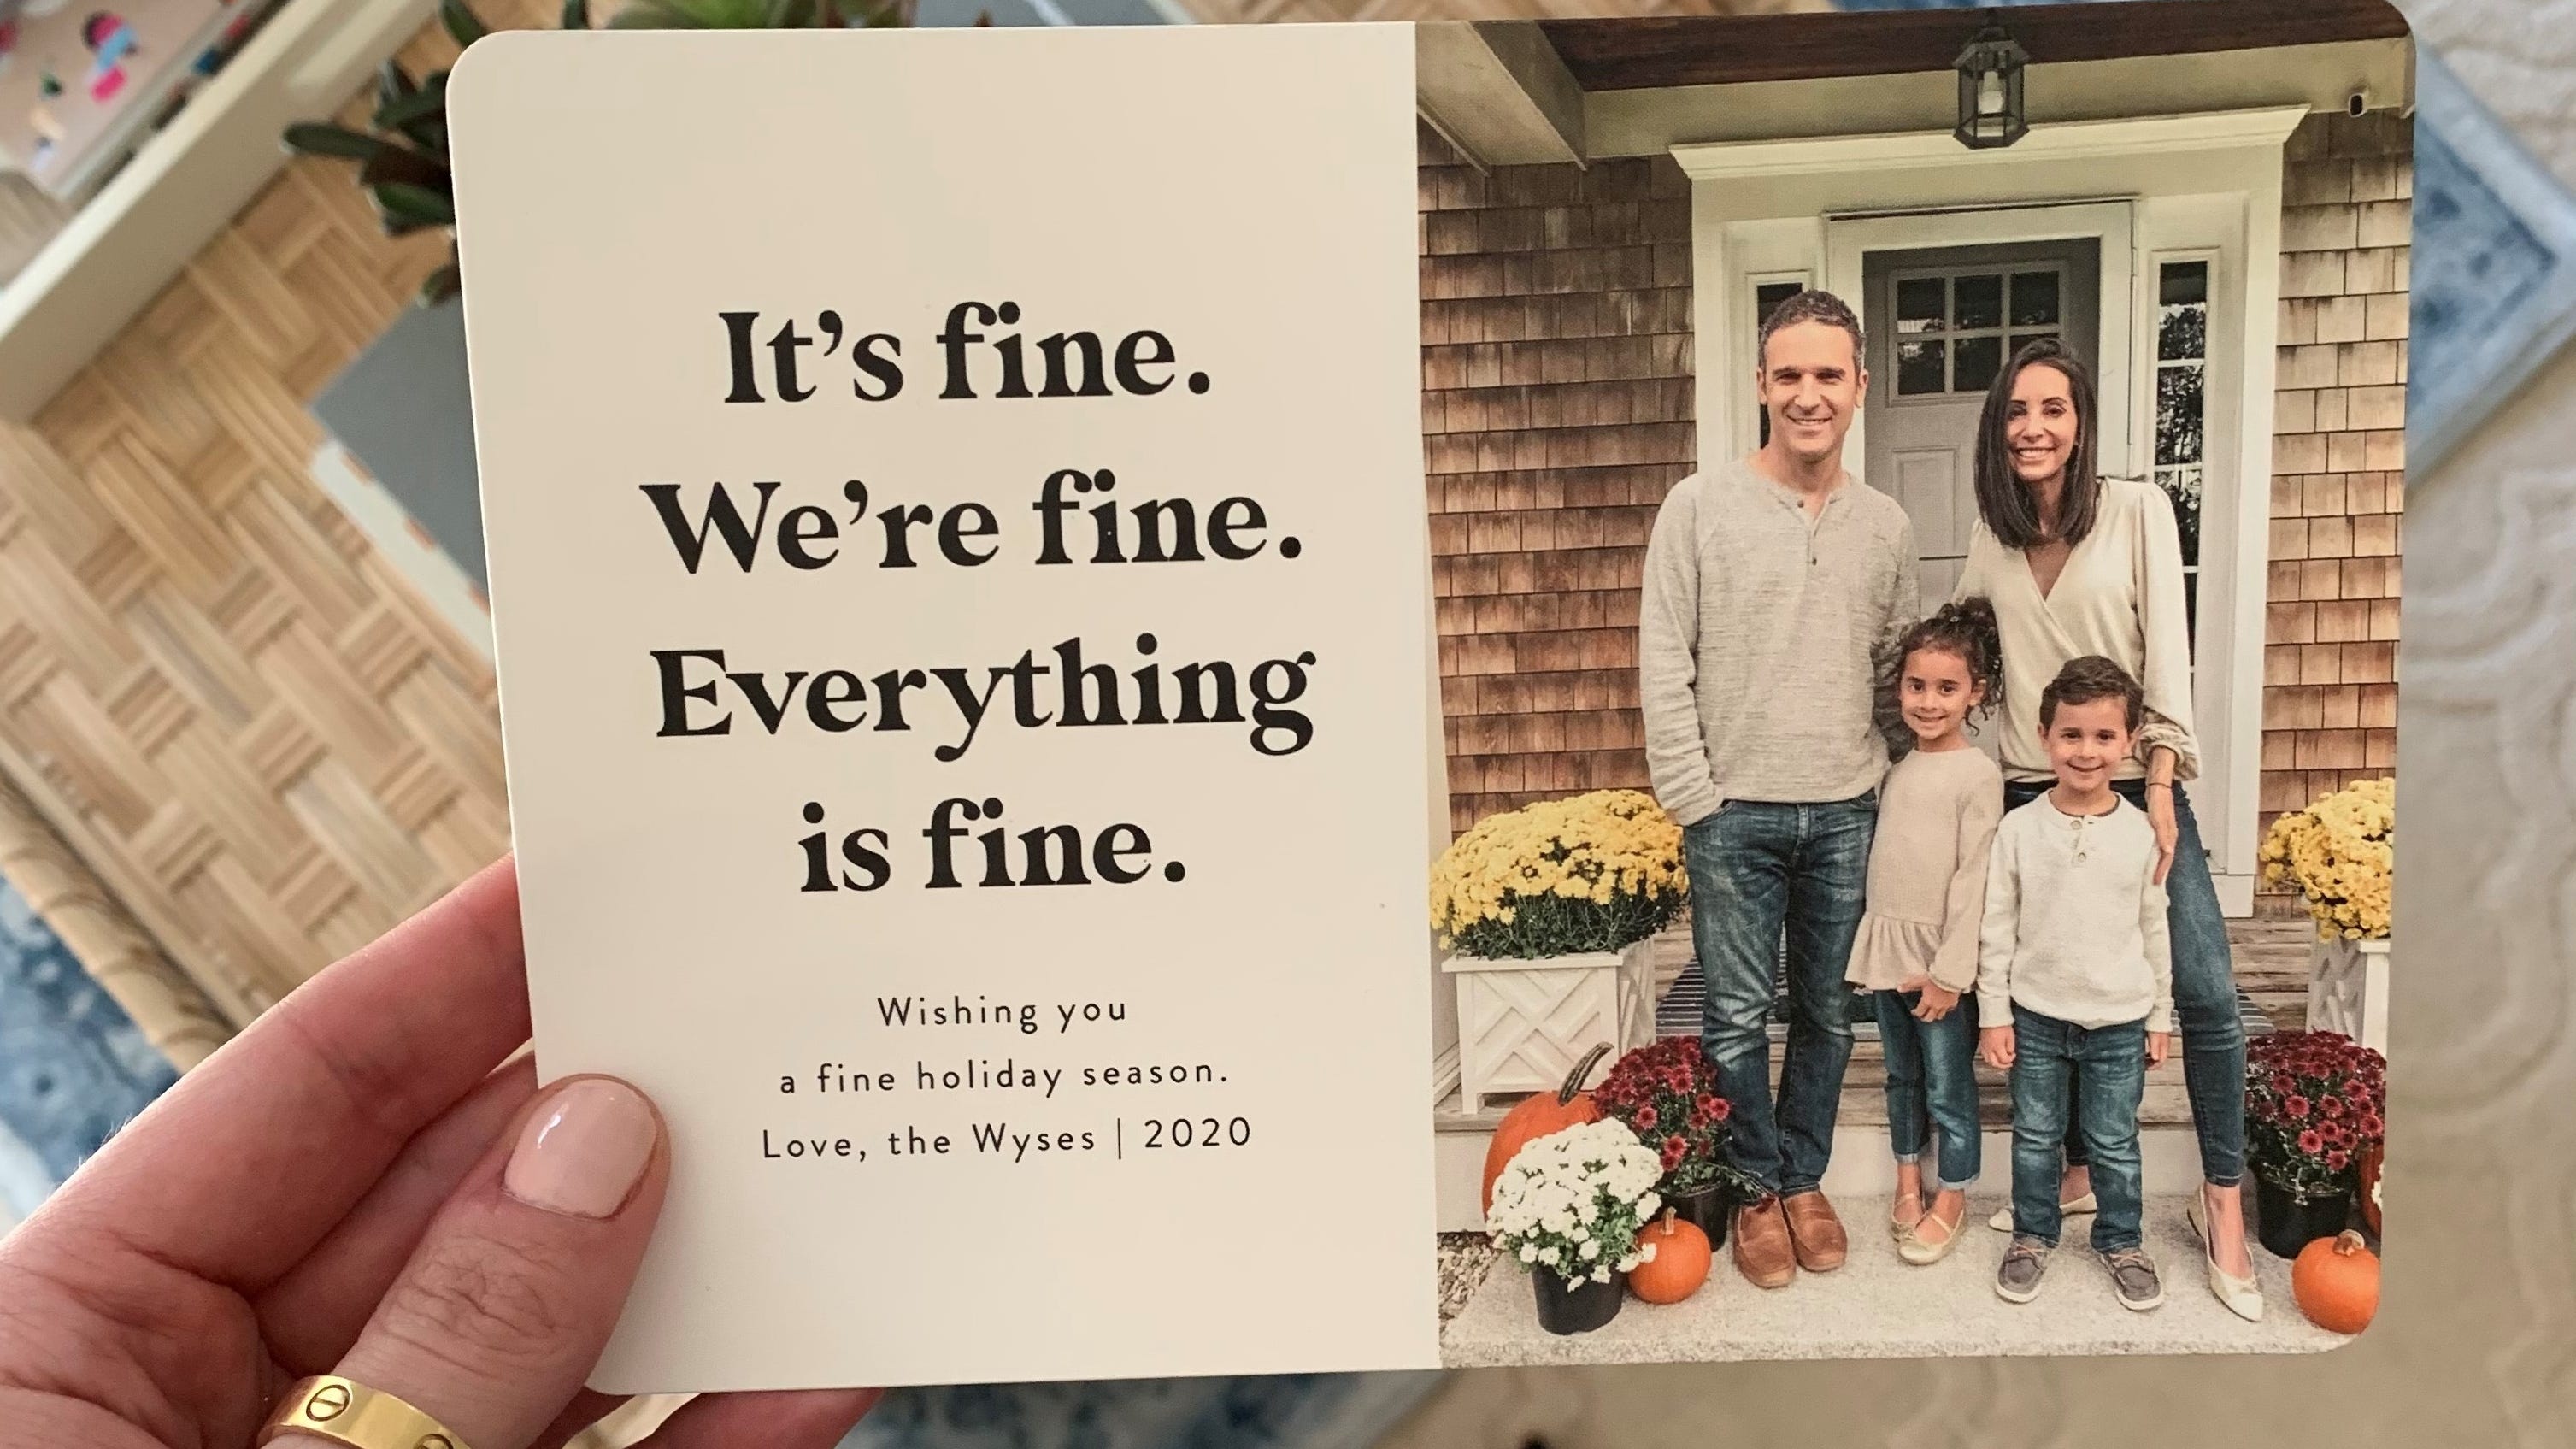 2020 holiday cards sure are honest: 'Wishing you a fine holiday season'